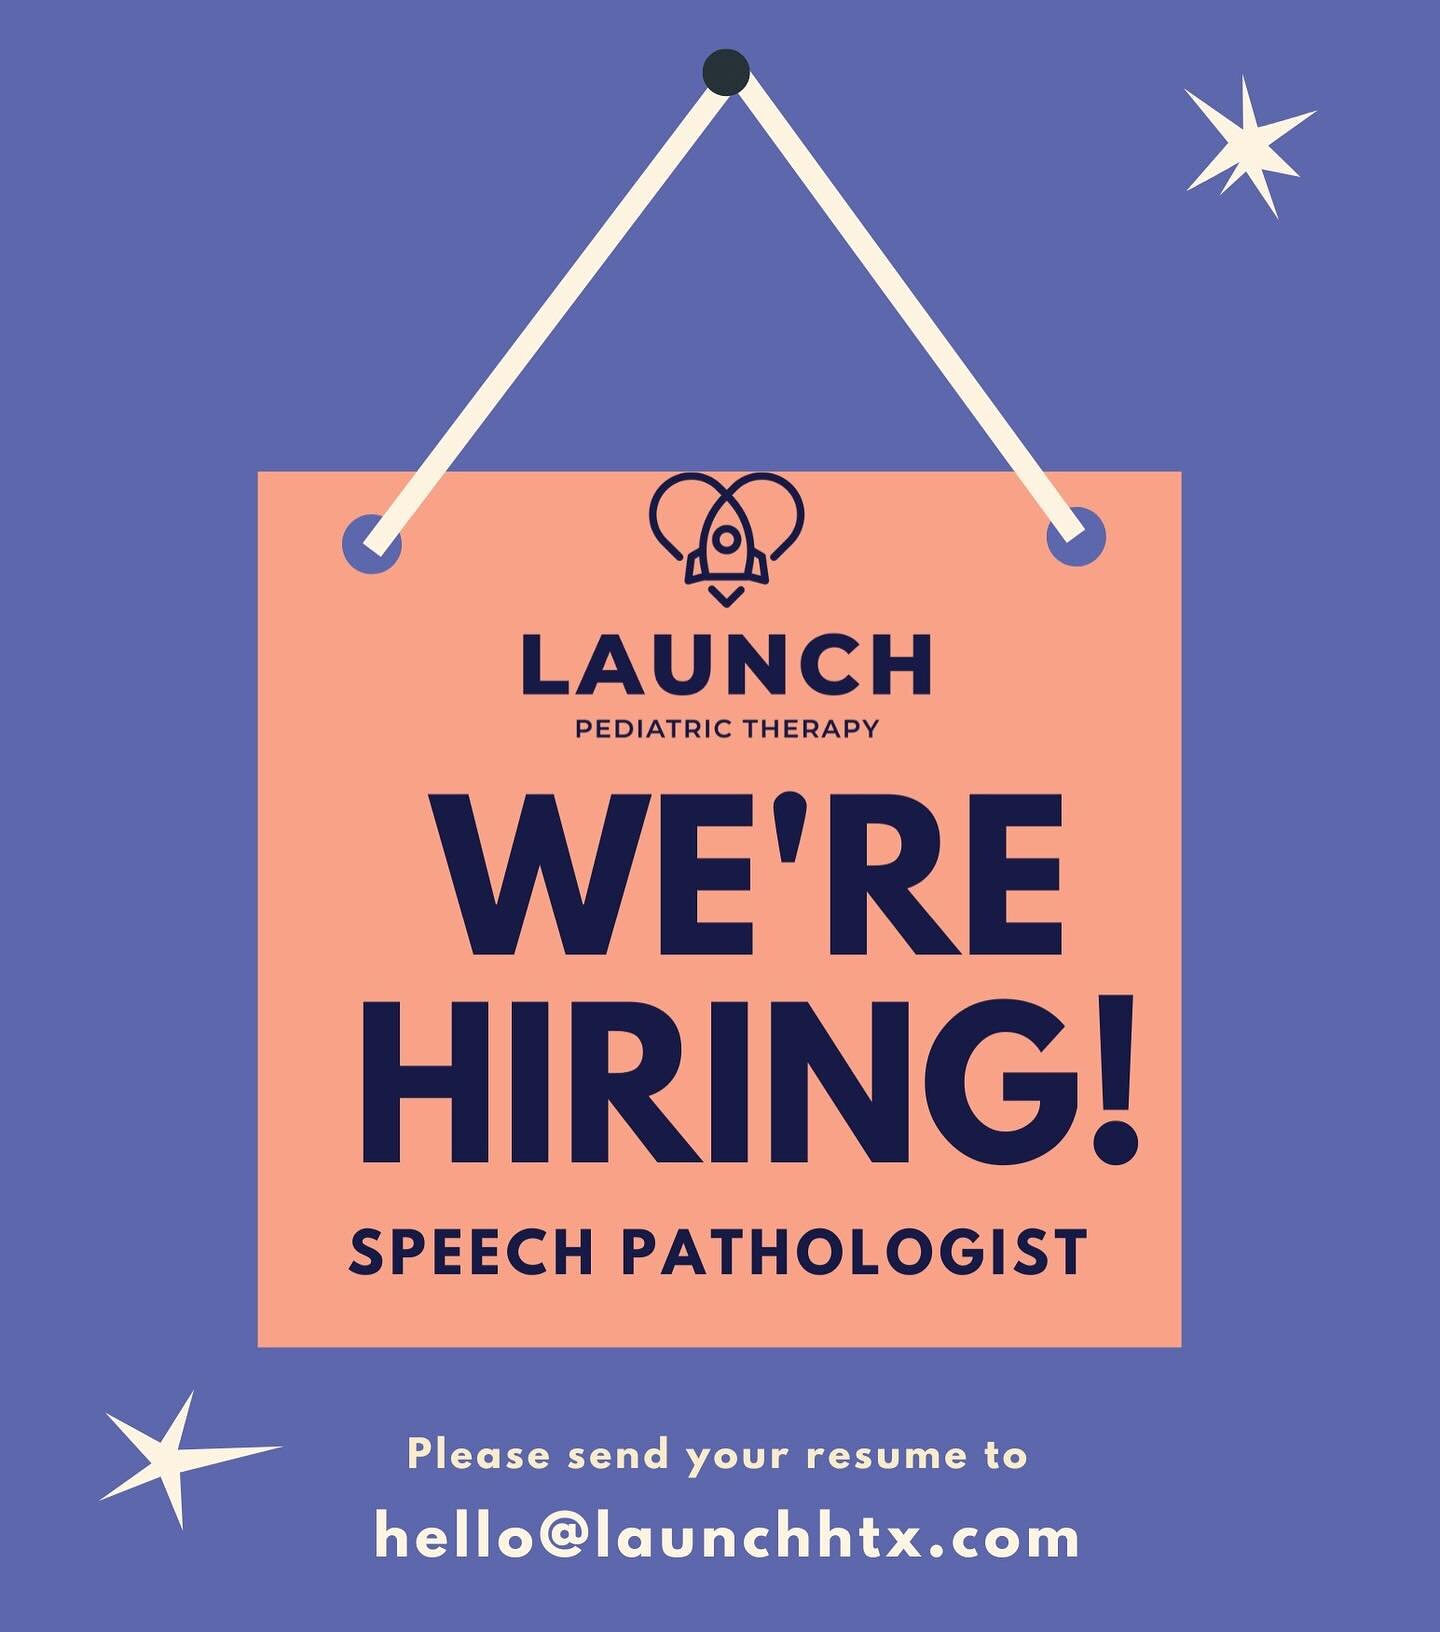 Tag a speechie!! We are growing again!!! 

#PediatricTherapy #HoustonTherapy #HoustonTherapist #SpeechTherapy #OccupationalTherapy #PhysicalTherapy #PediatricOccupationalTherapist  #PediatricPhysicalTherapist #PediatricSpeechTherapist #HoustonSpeechT